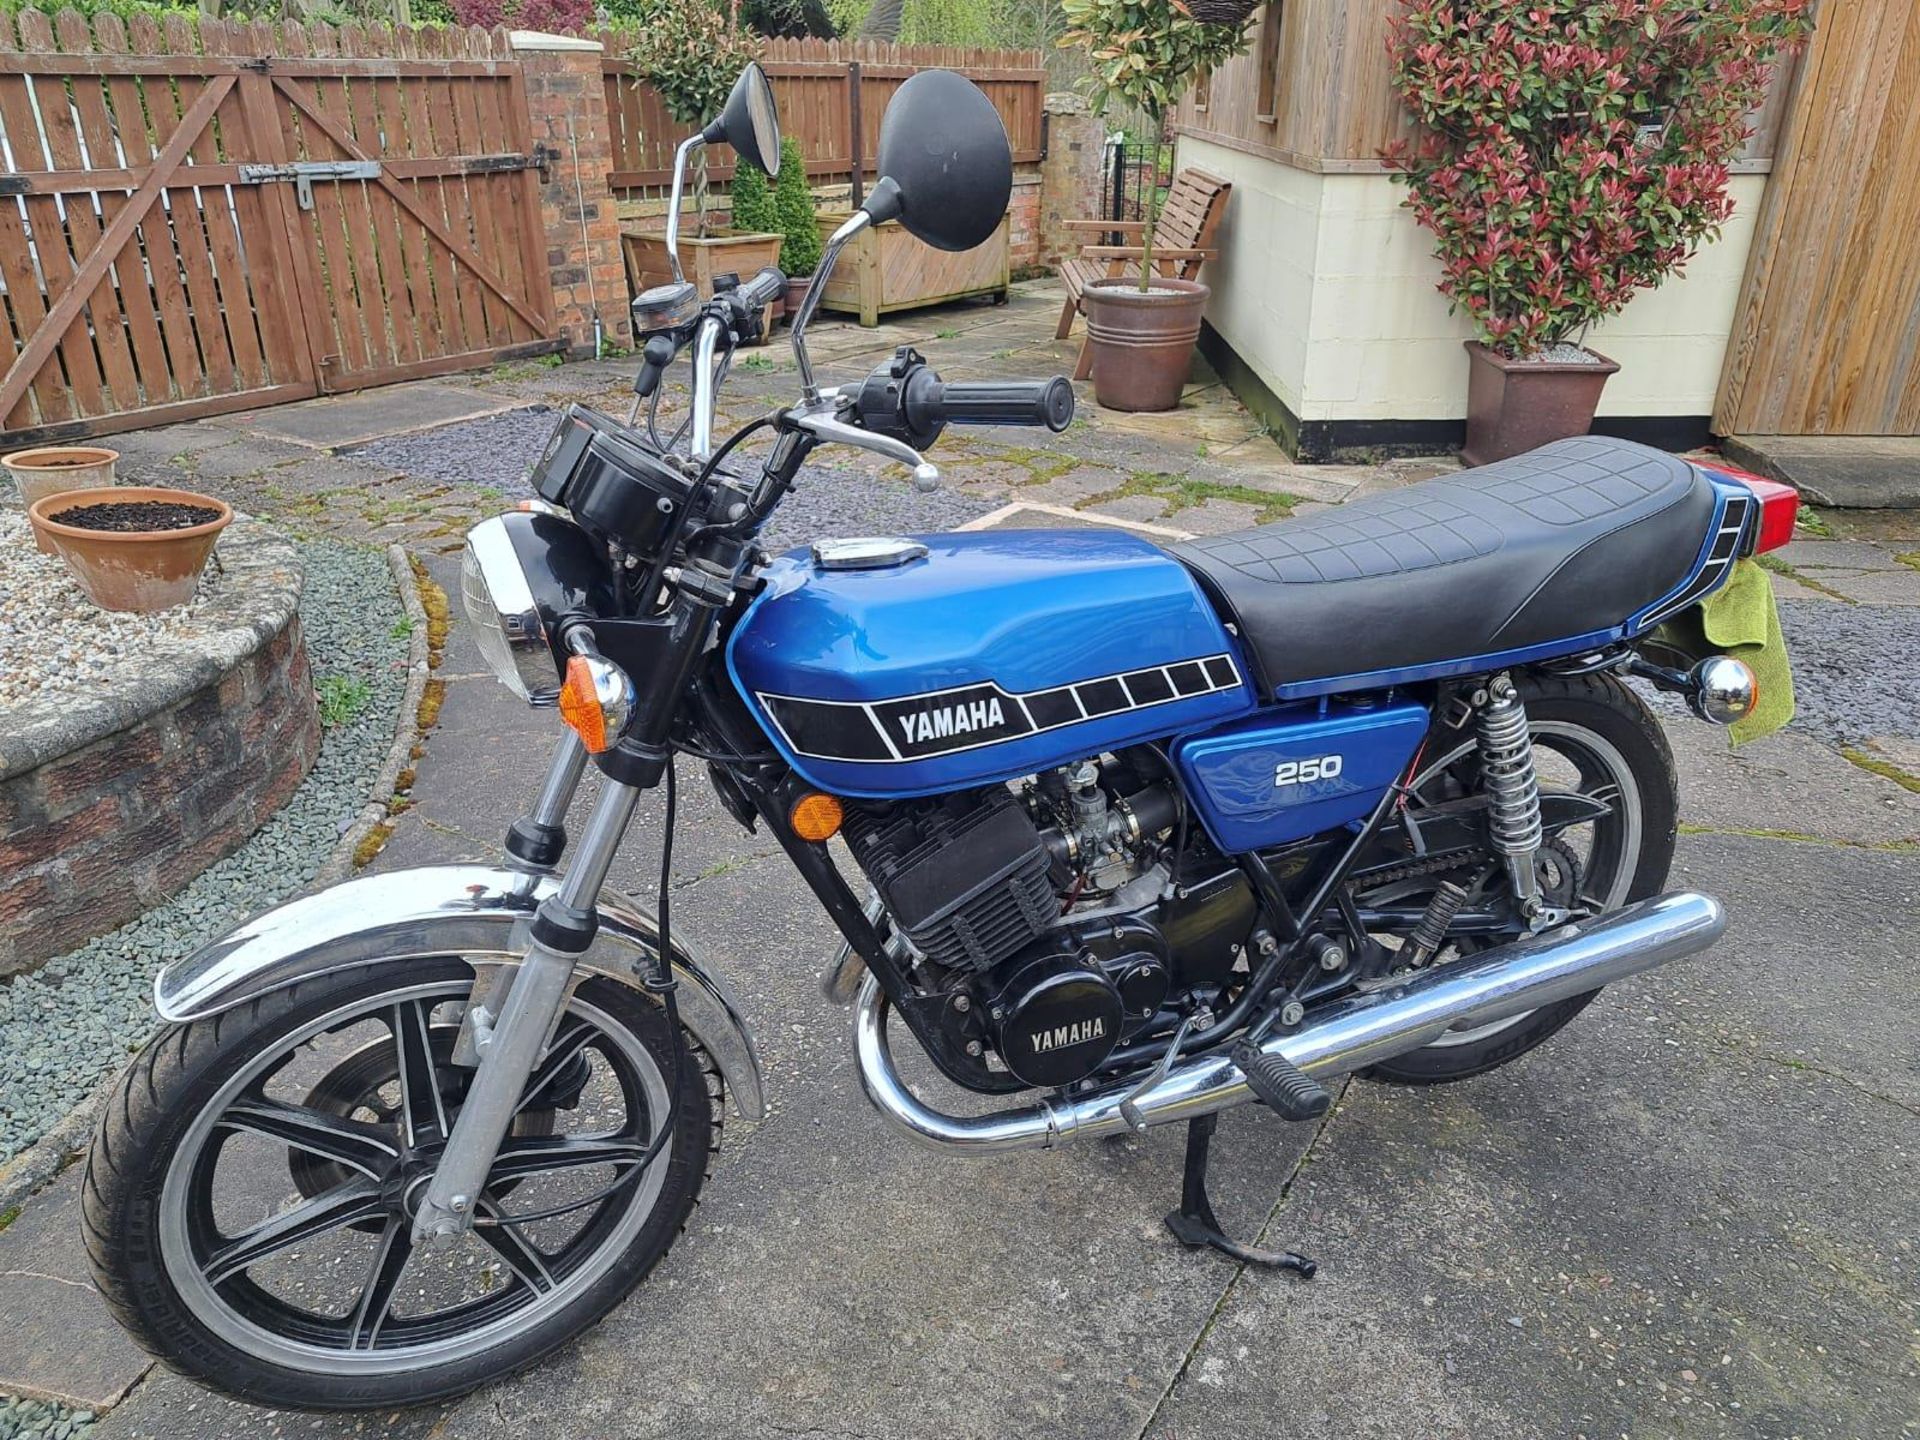 A YAMAHA RD 250 MOTORCYCLE, MILEAGE AT CATALOGING 29152, INVOICES FOR PARTS AND PREVIOUS MOTs - ON A